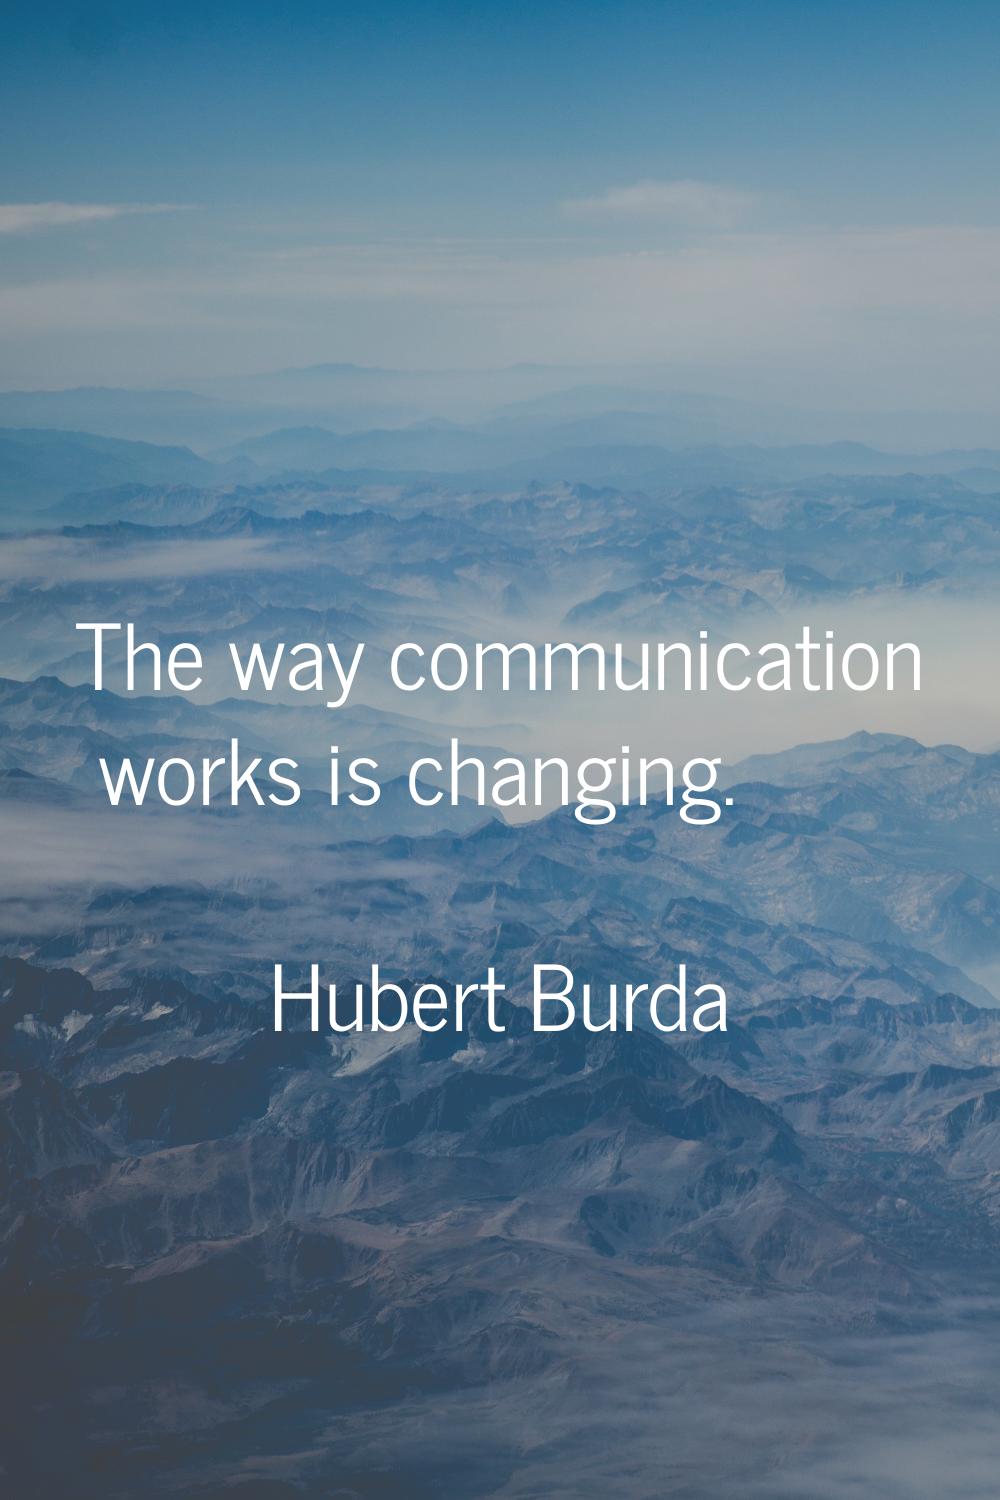 The way communication works is changing.